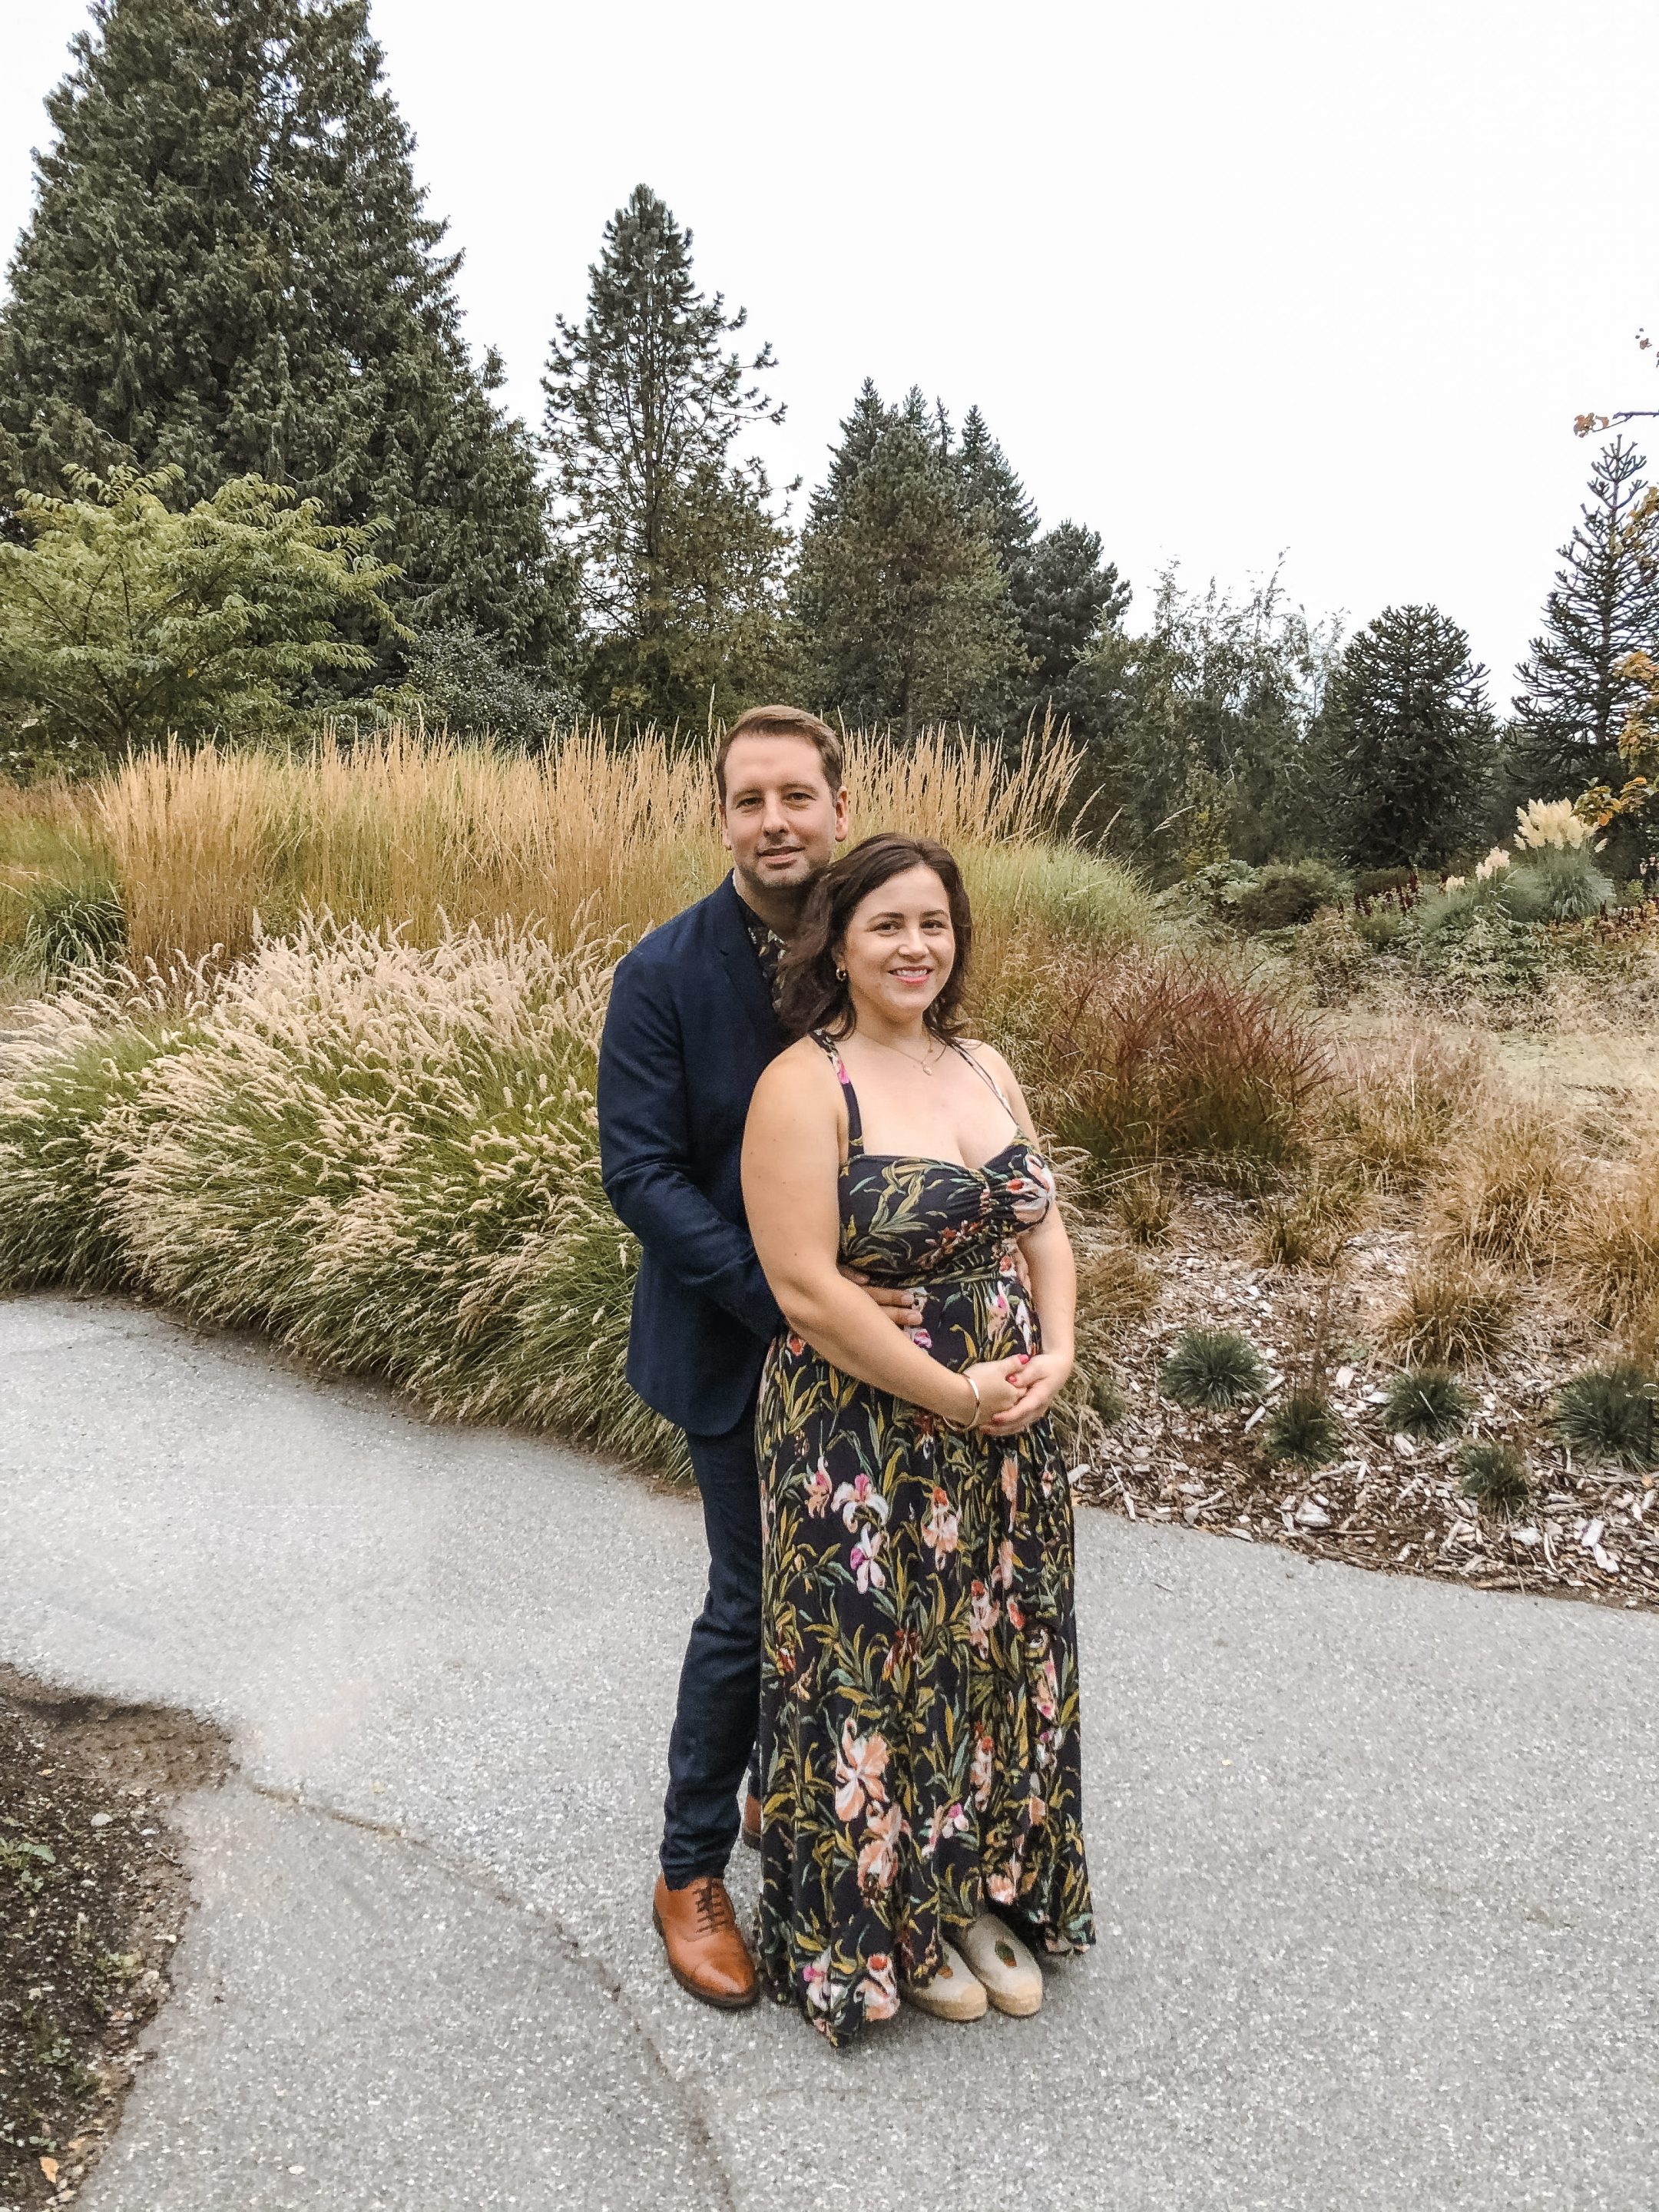 Fall Wedding Outfit | Friday Roundup October 11